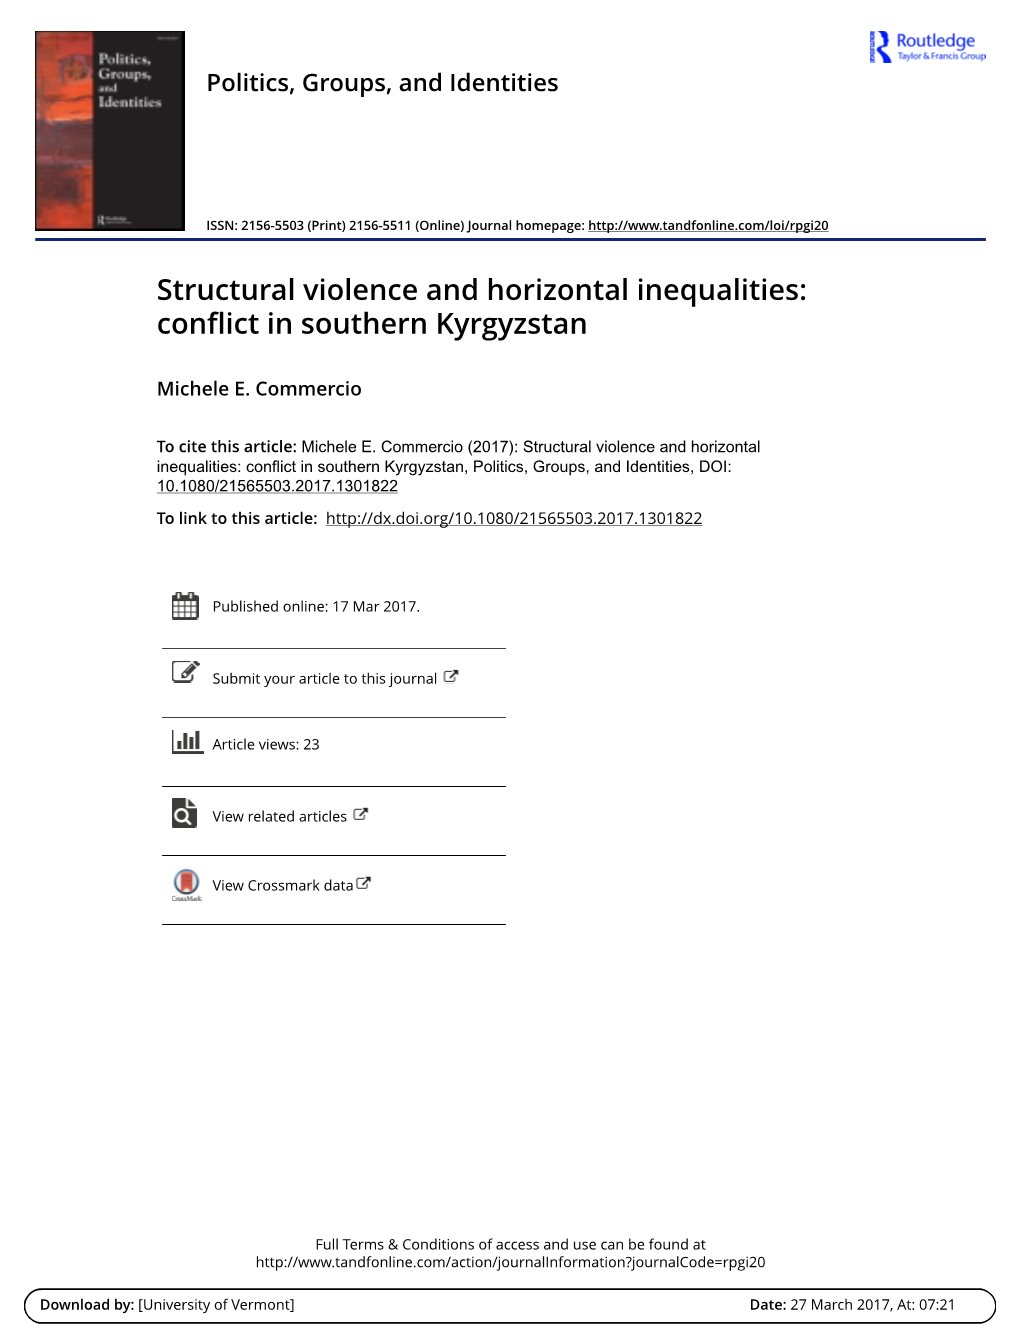 Structural Violence and Horizontal Inequalities: Conflict in Southern Kyrgyzstan